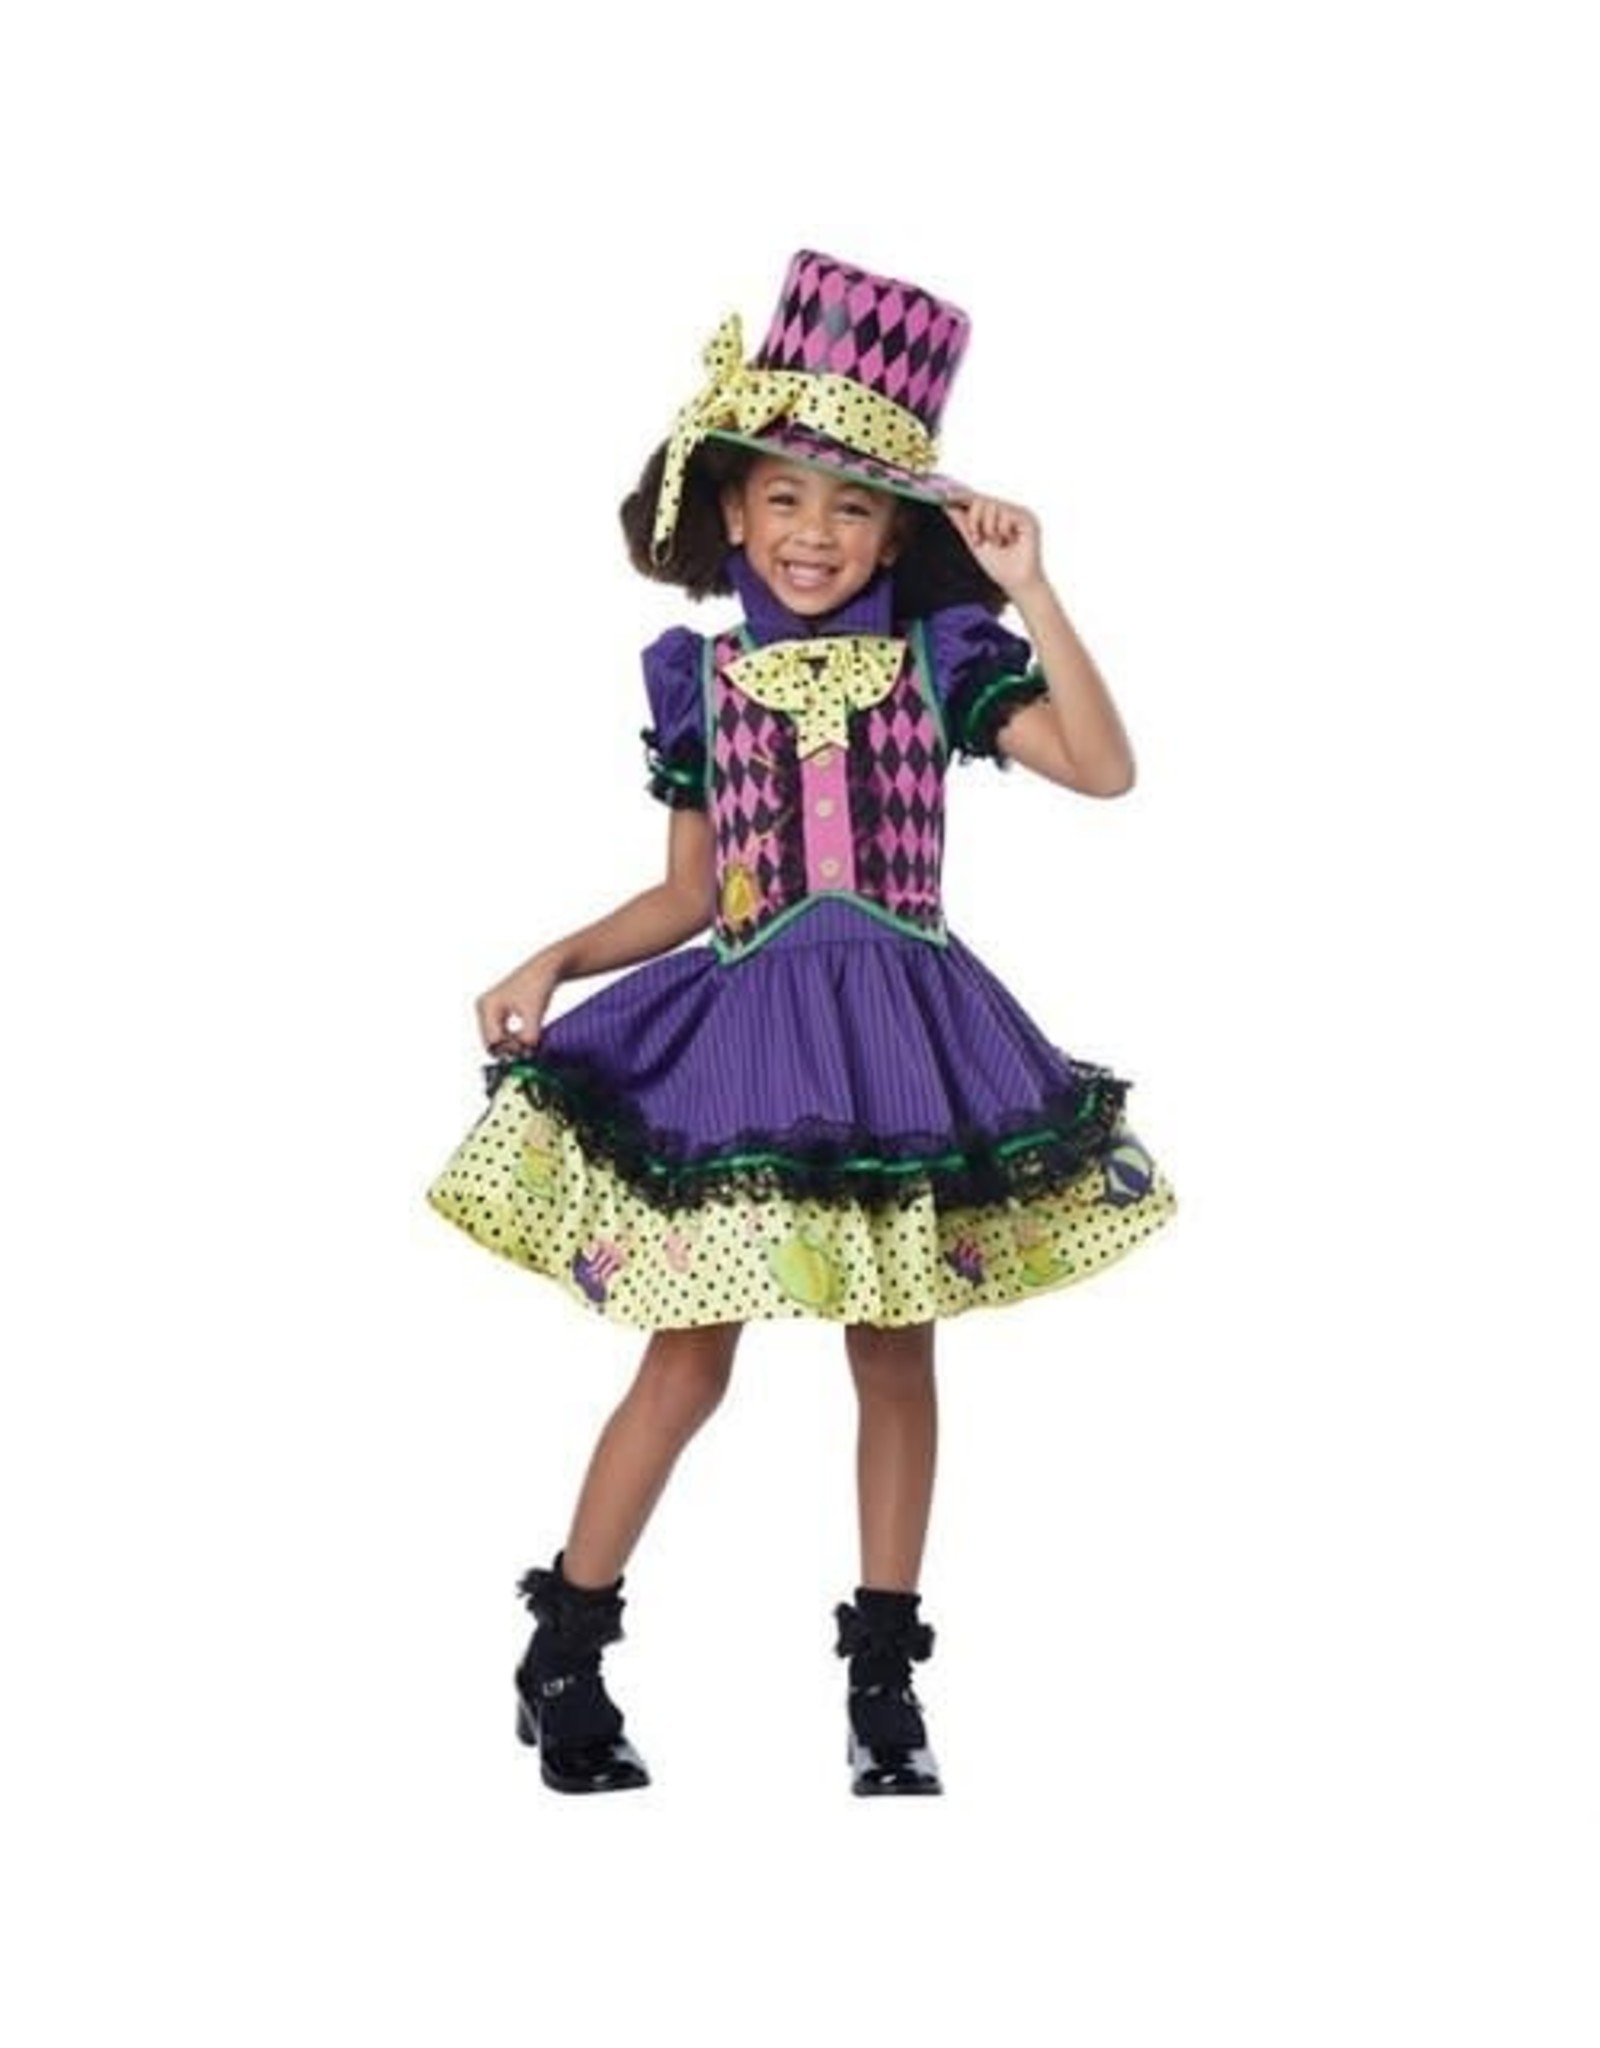 California Costume Collections Deluxeb Mad Hatter-Ess, Multi, L - Large